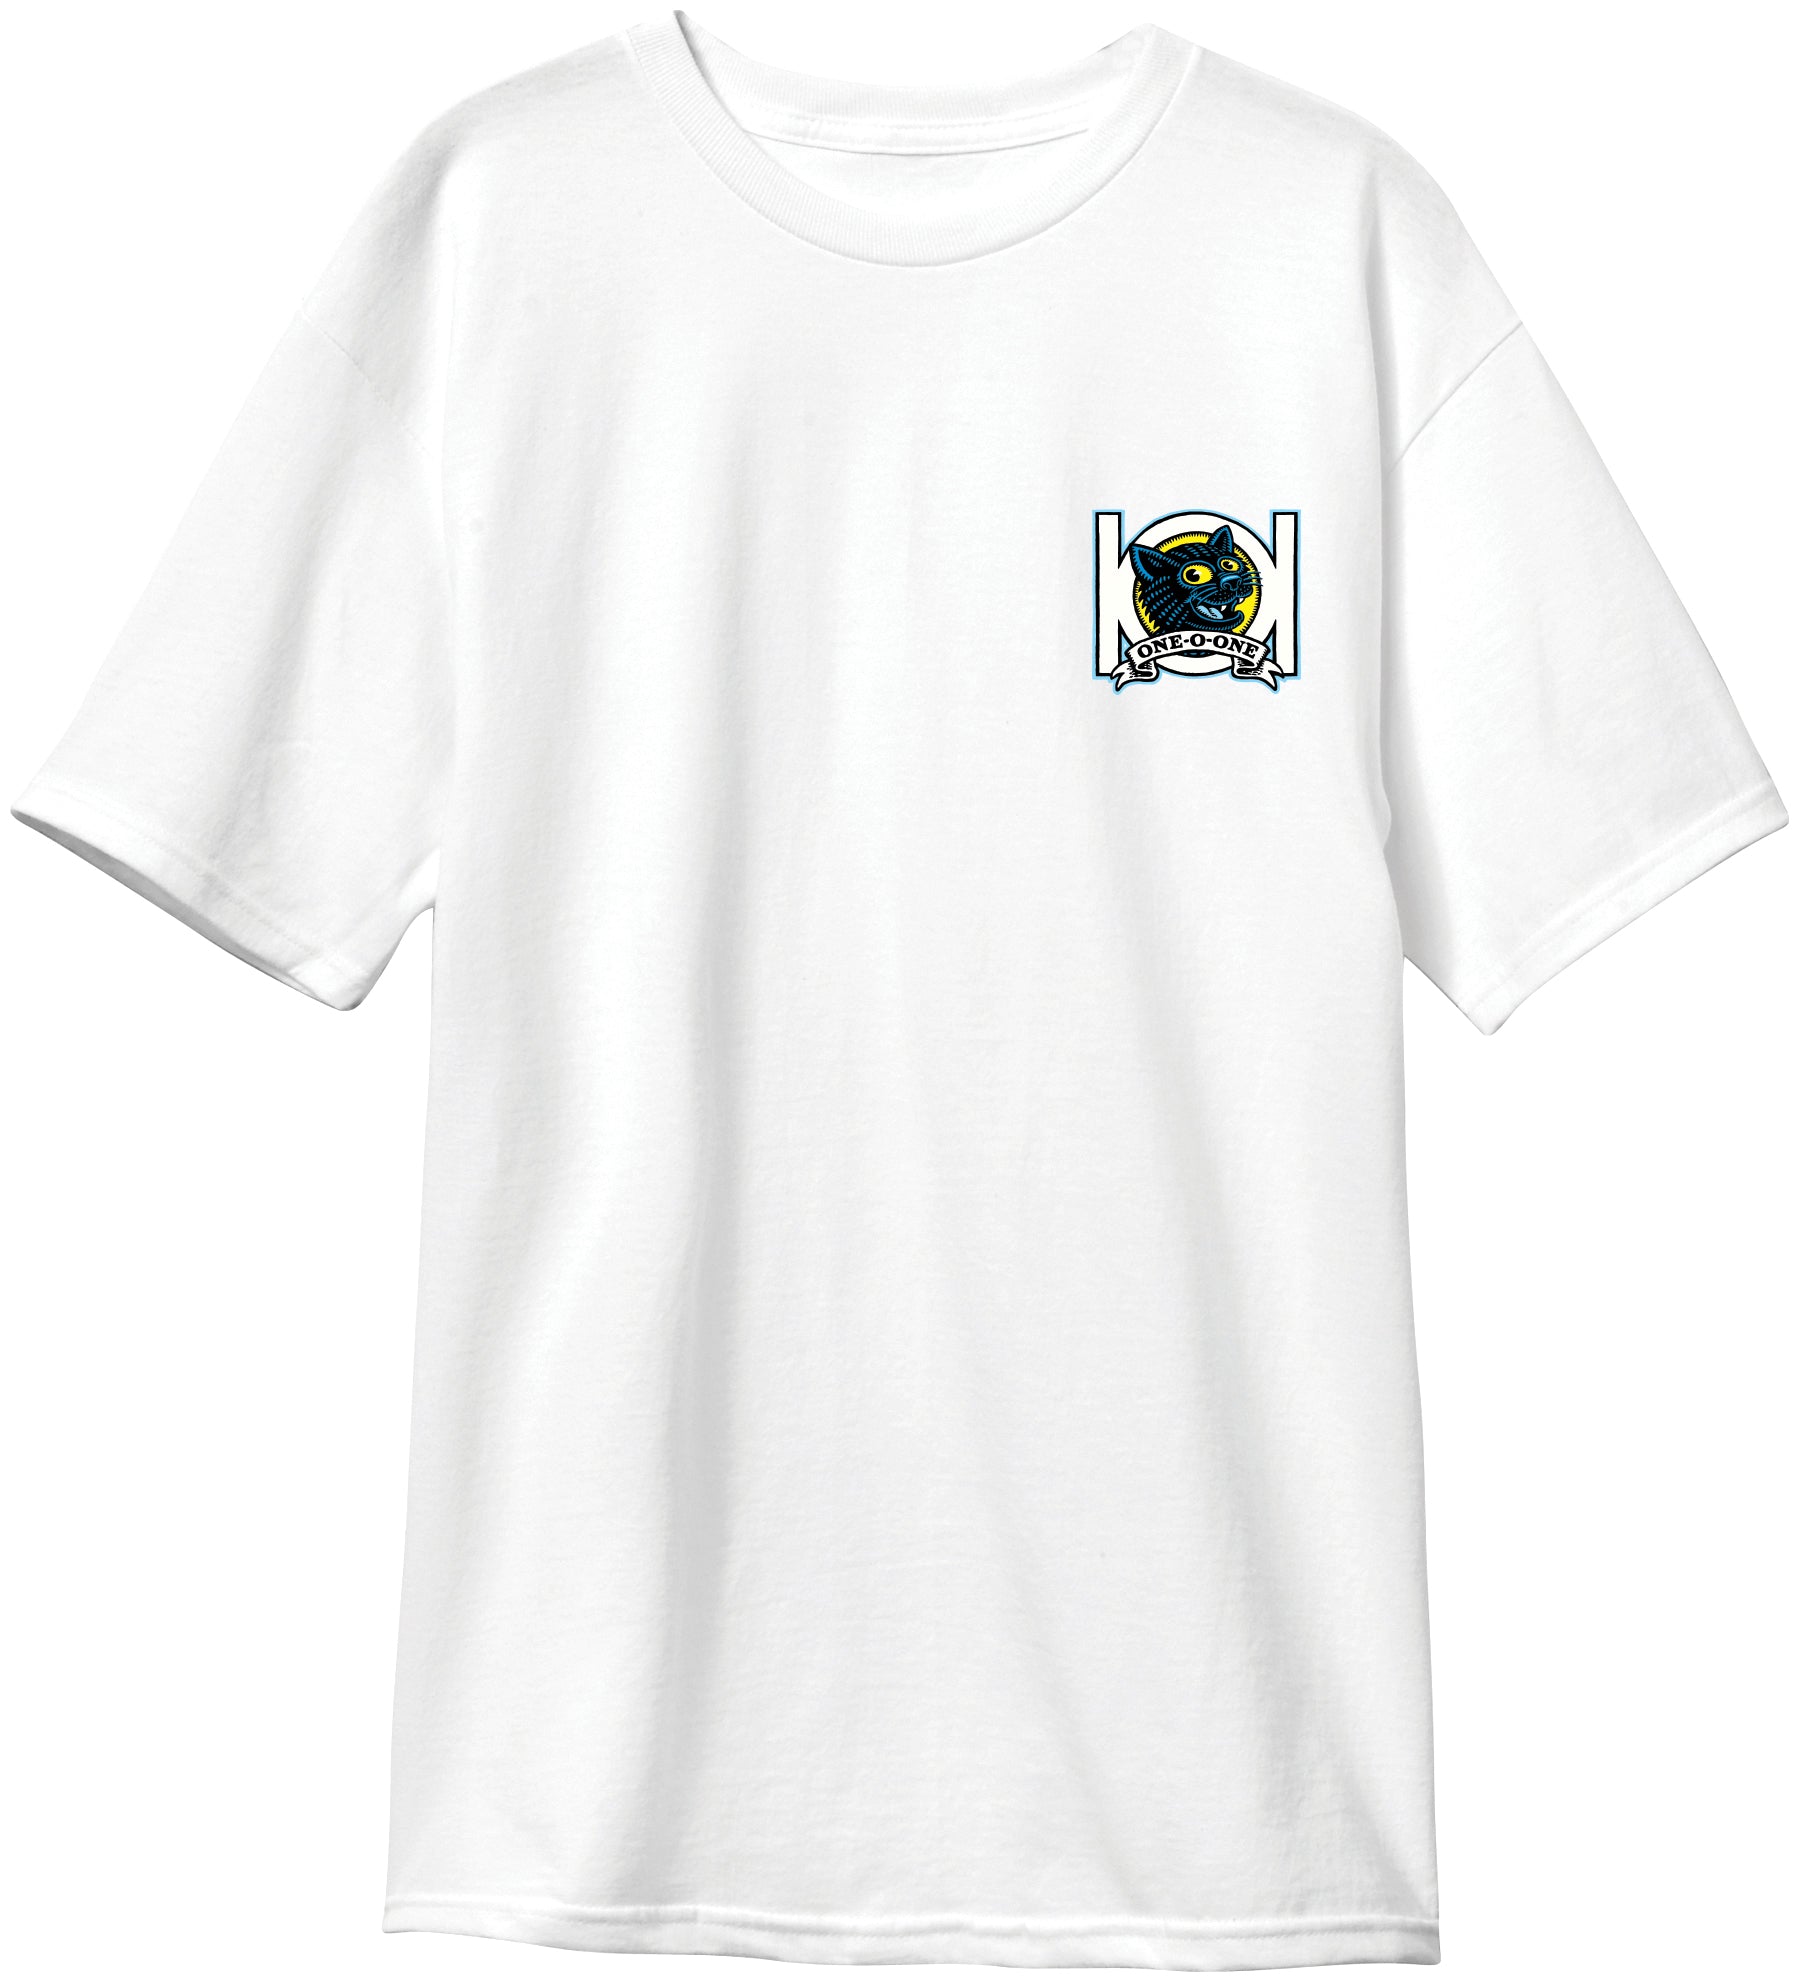 Heritage 101 Natas Panther T-Shirt - White - Invisible Board Shop